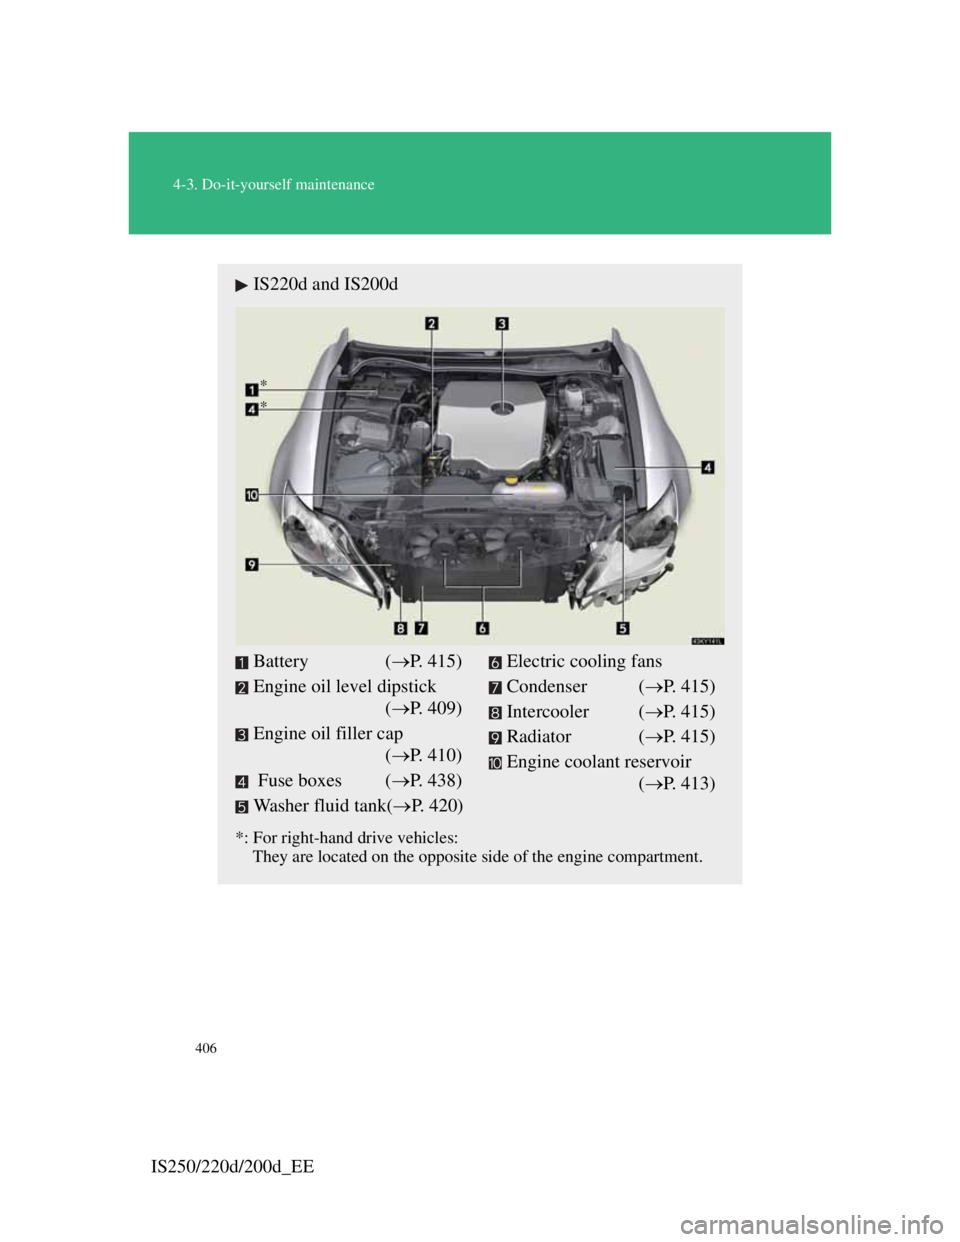 Lexus IS220d 2011  Owners Manual 406
4-3. Do-it-yourself maintenance
IS250/220d/200d_EE
IS220d and IS200d
*: For right-hand drive vehicles: 
    They are located on the opposite side of the engine compartment.
Battery (P. 415)
Eng